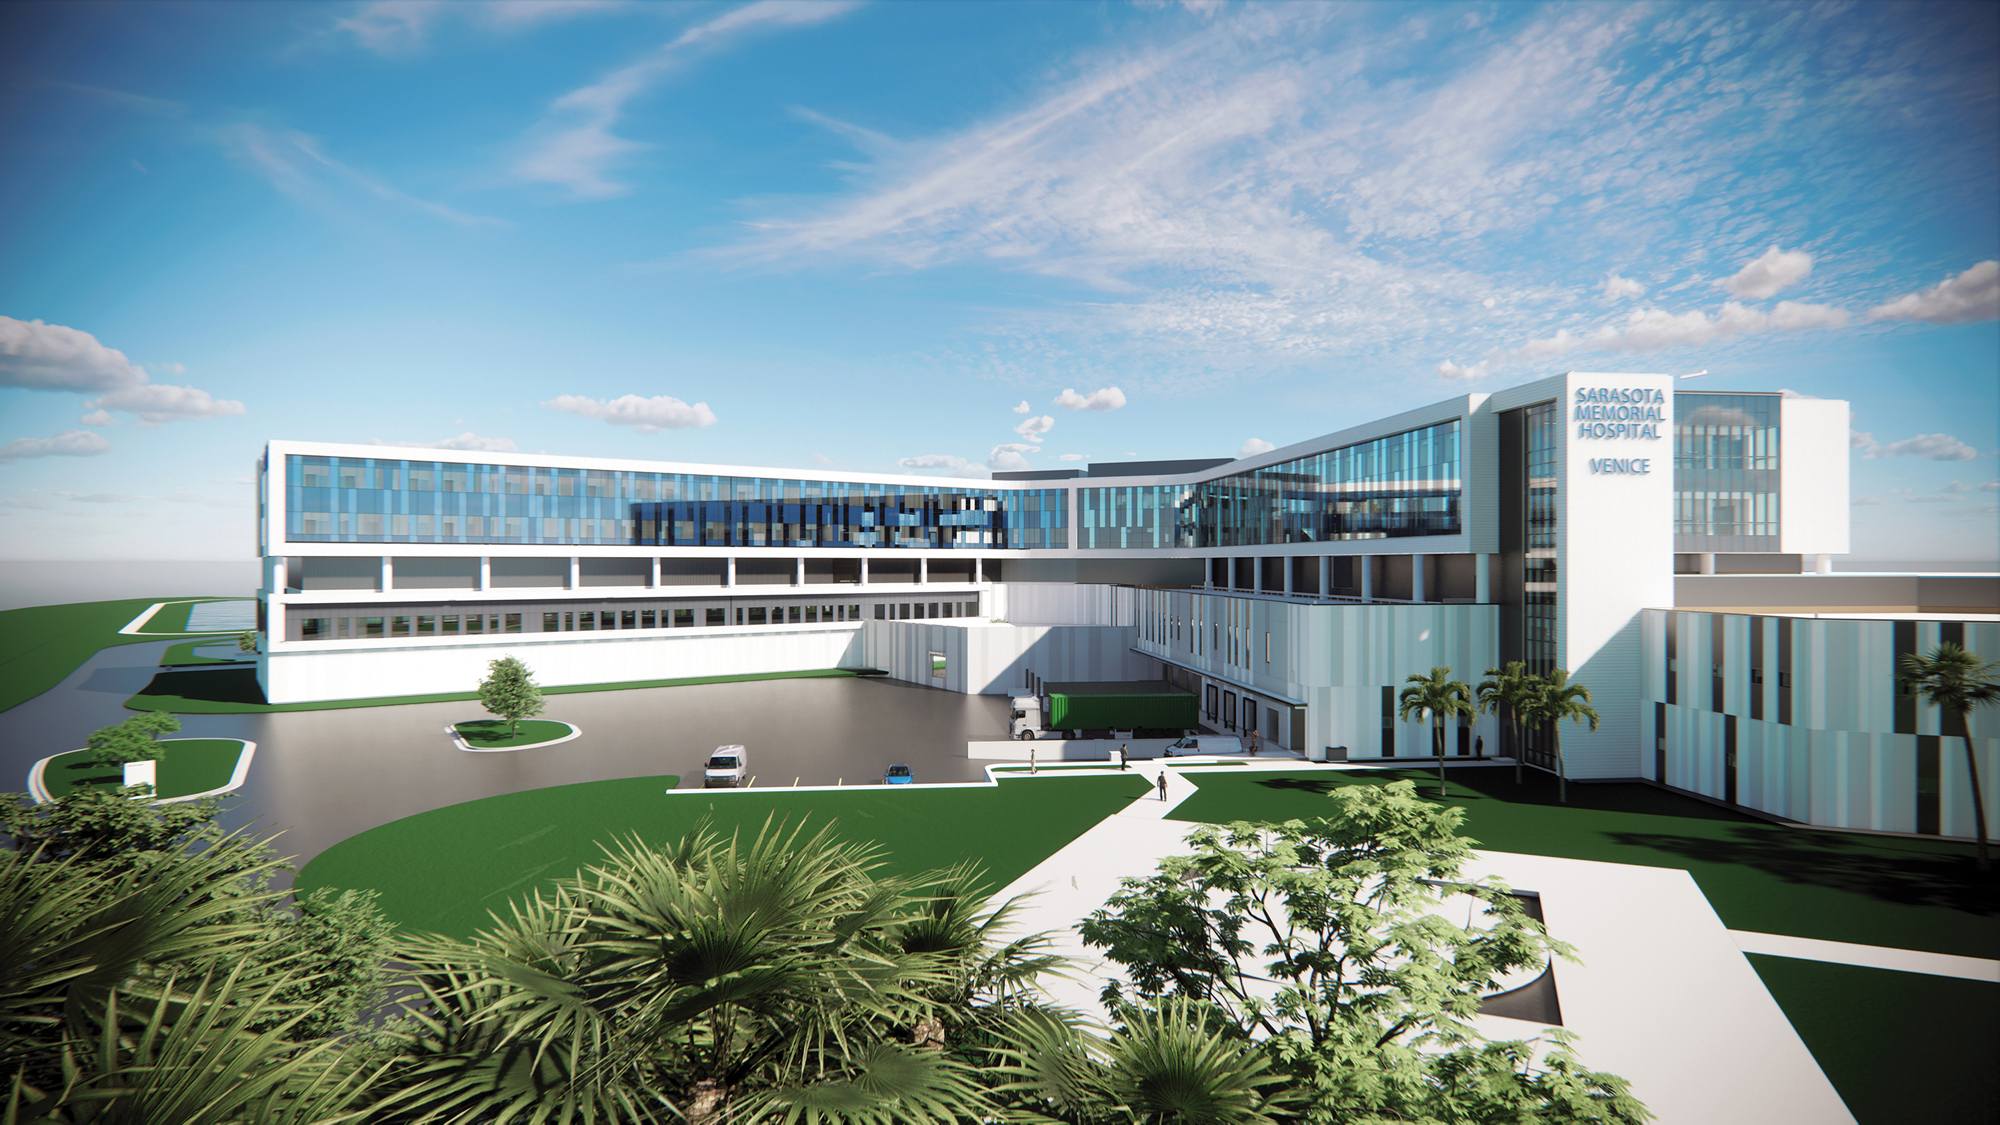 The planned expansion of SMH-Venice will add 68 private patient suites at a cost of $113 million. (Courtesy rendering)